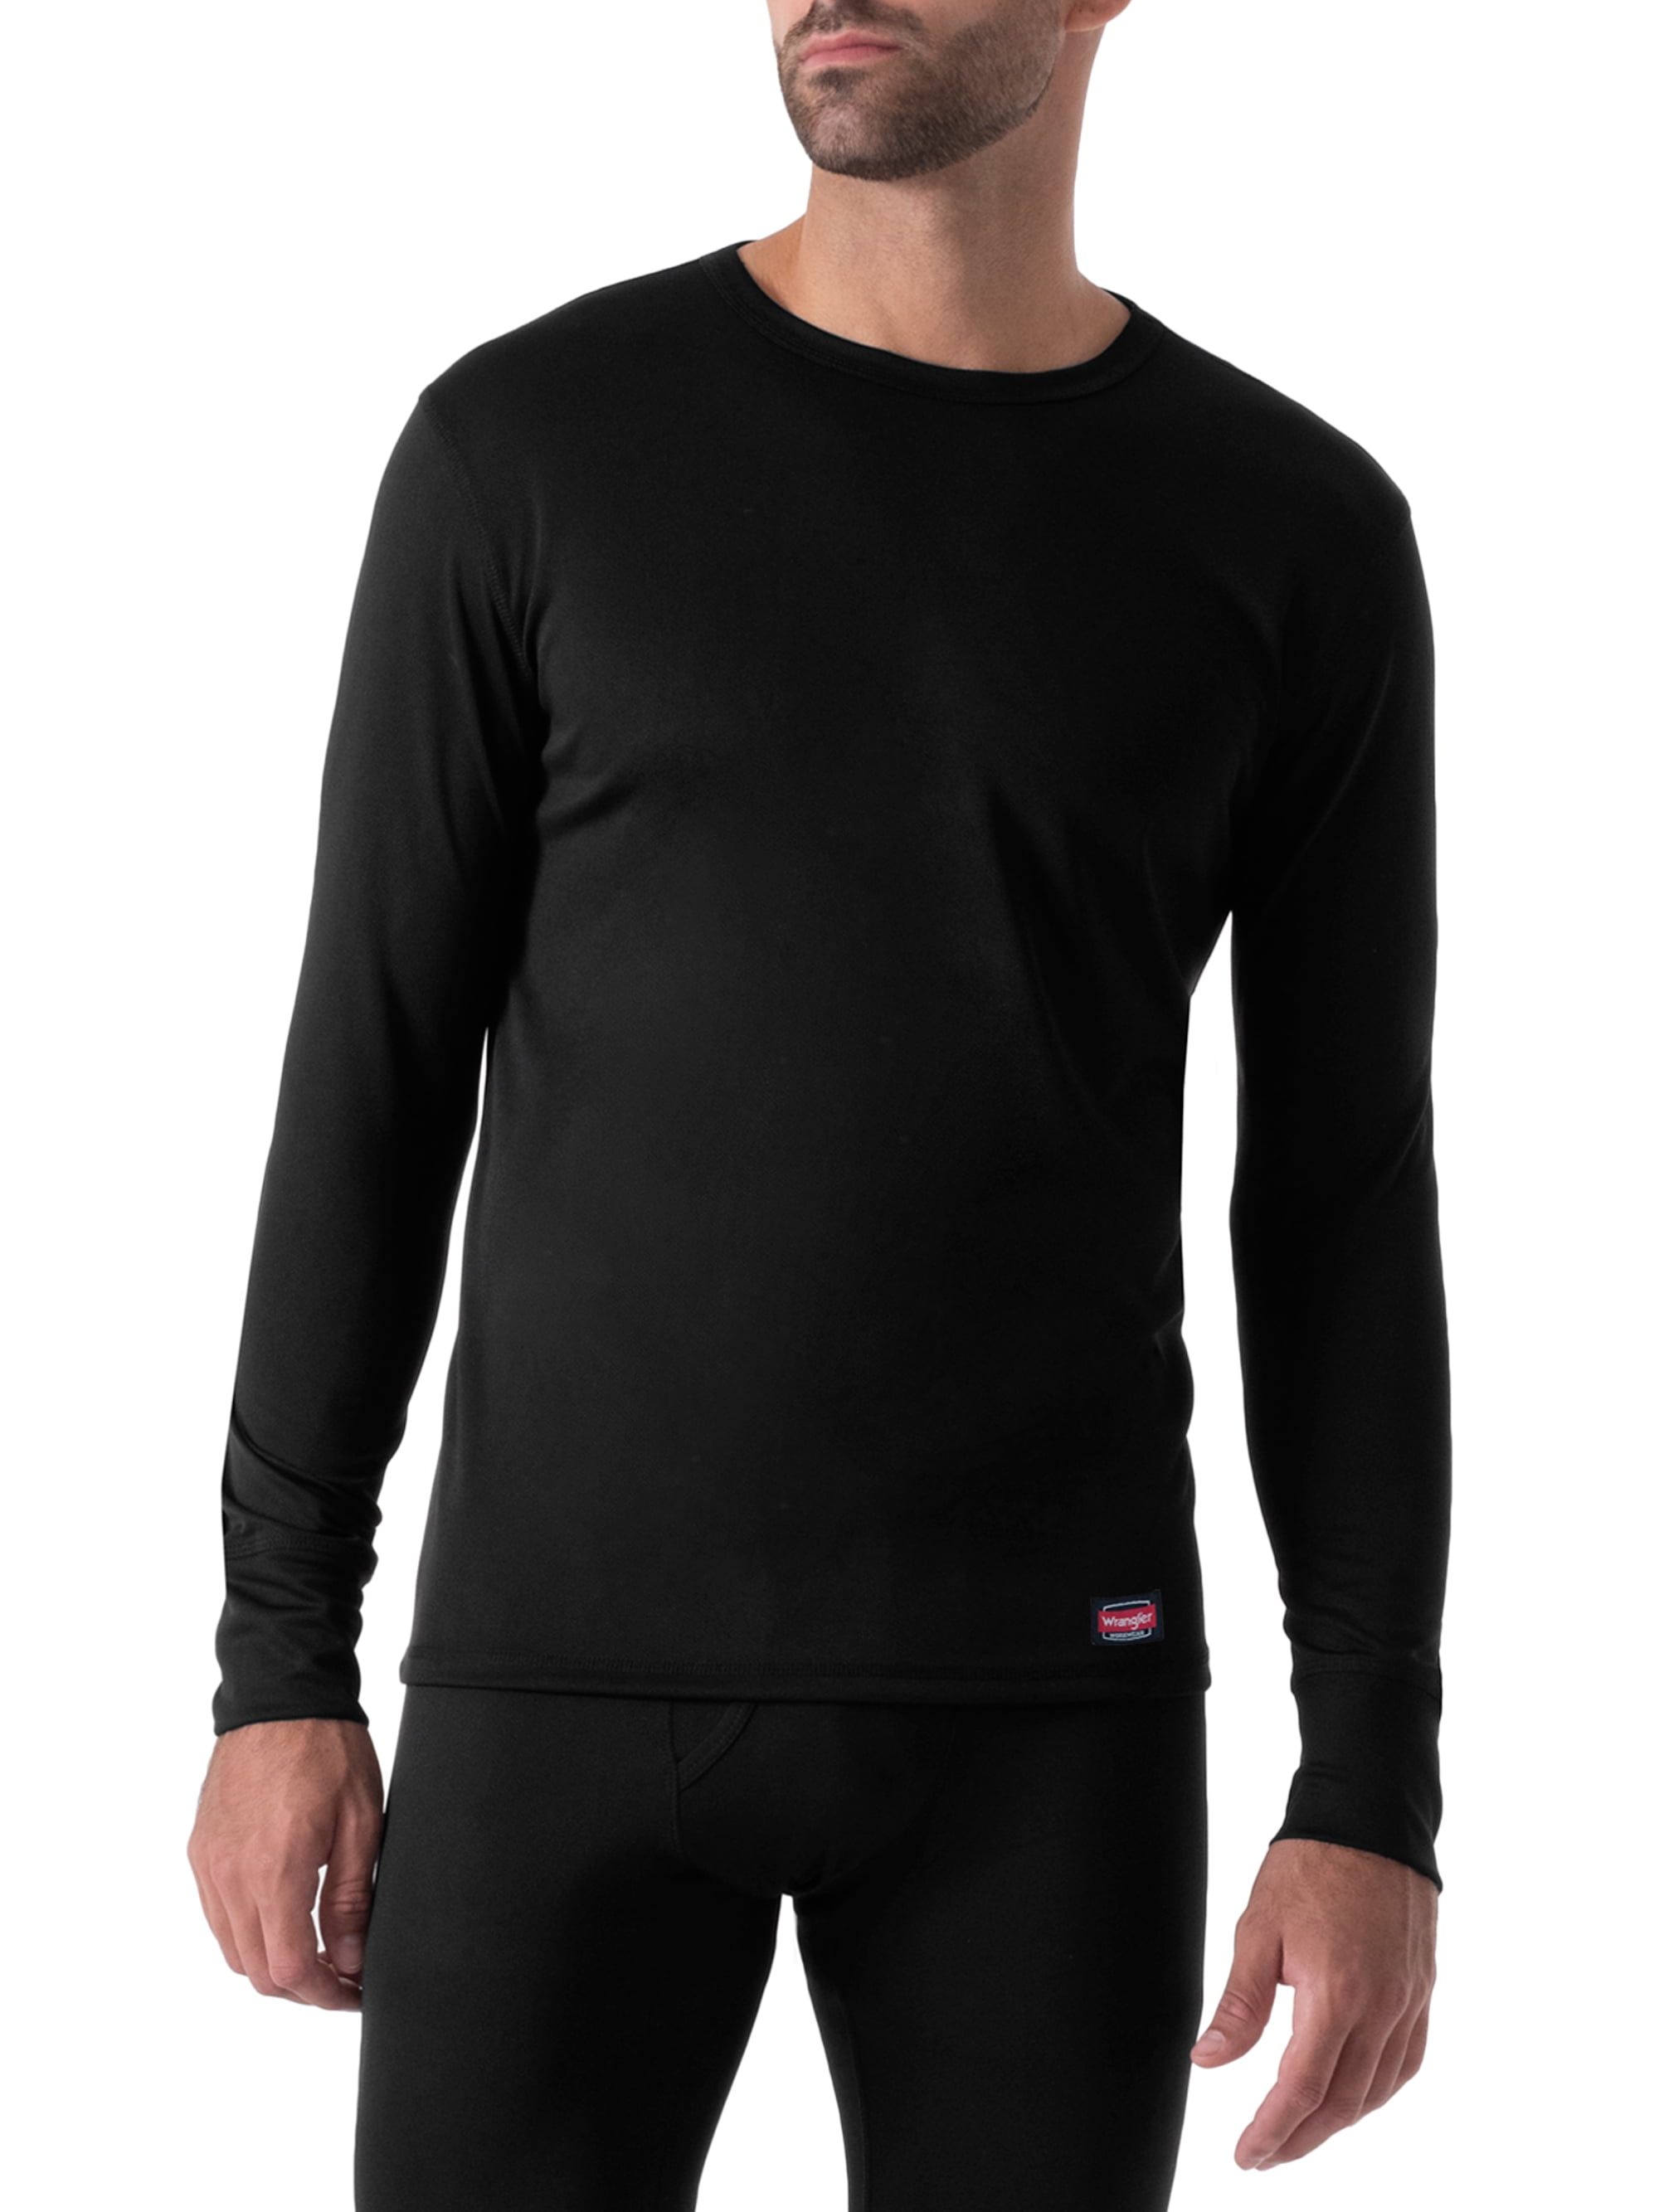 Details about   New RUSSELL PERFORMANCE Active Baselayer with stretch MEN'S PANTS L2 